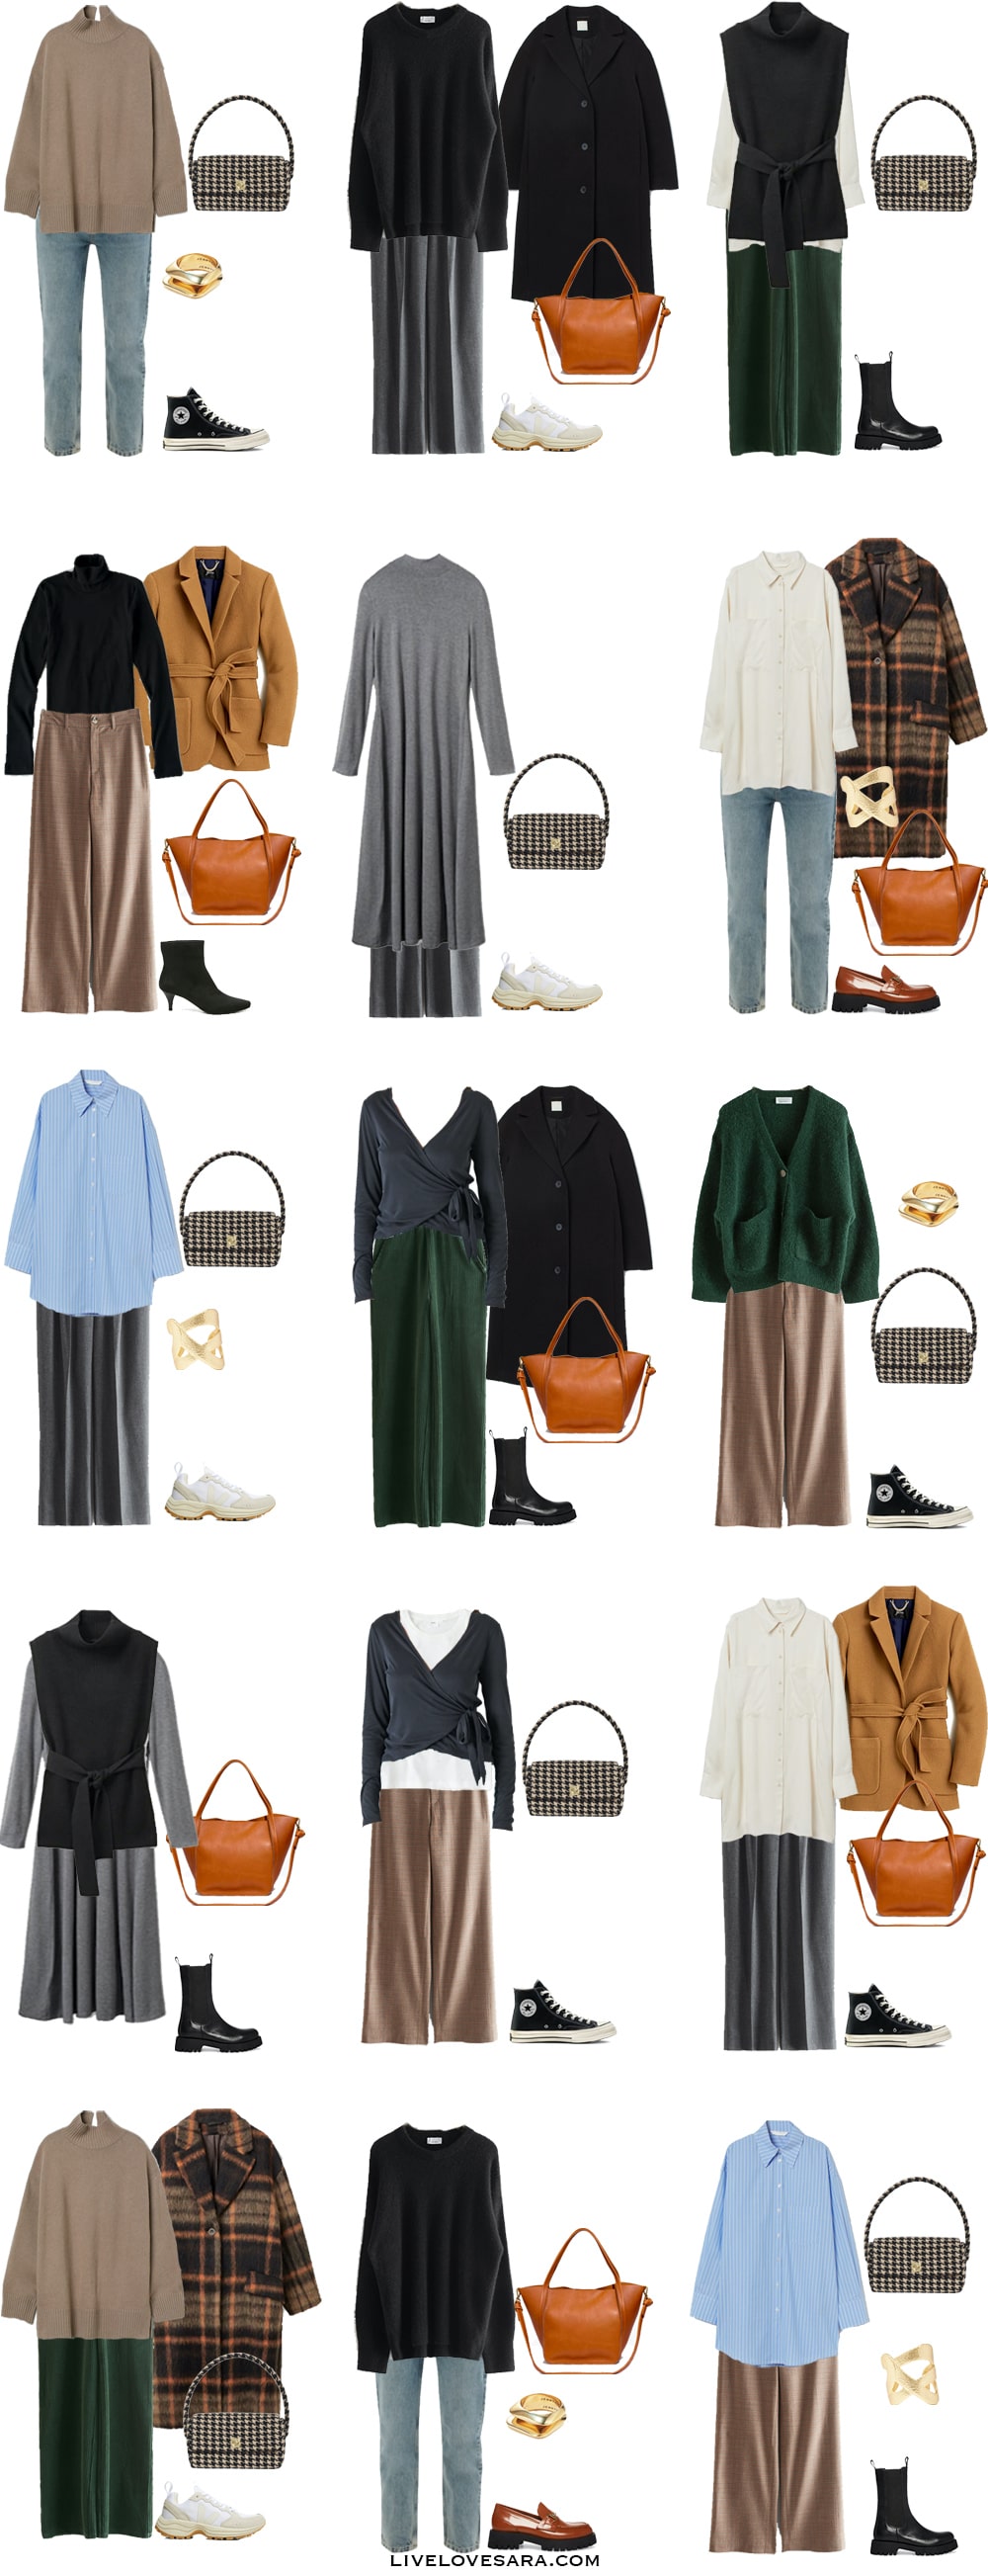 A white background with the pieces for how to dress an Inverted Triangle body shape capsule wardrobe laid out in 15 outfits.